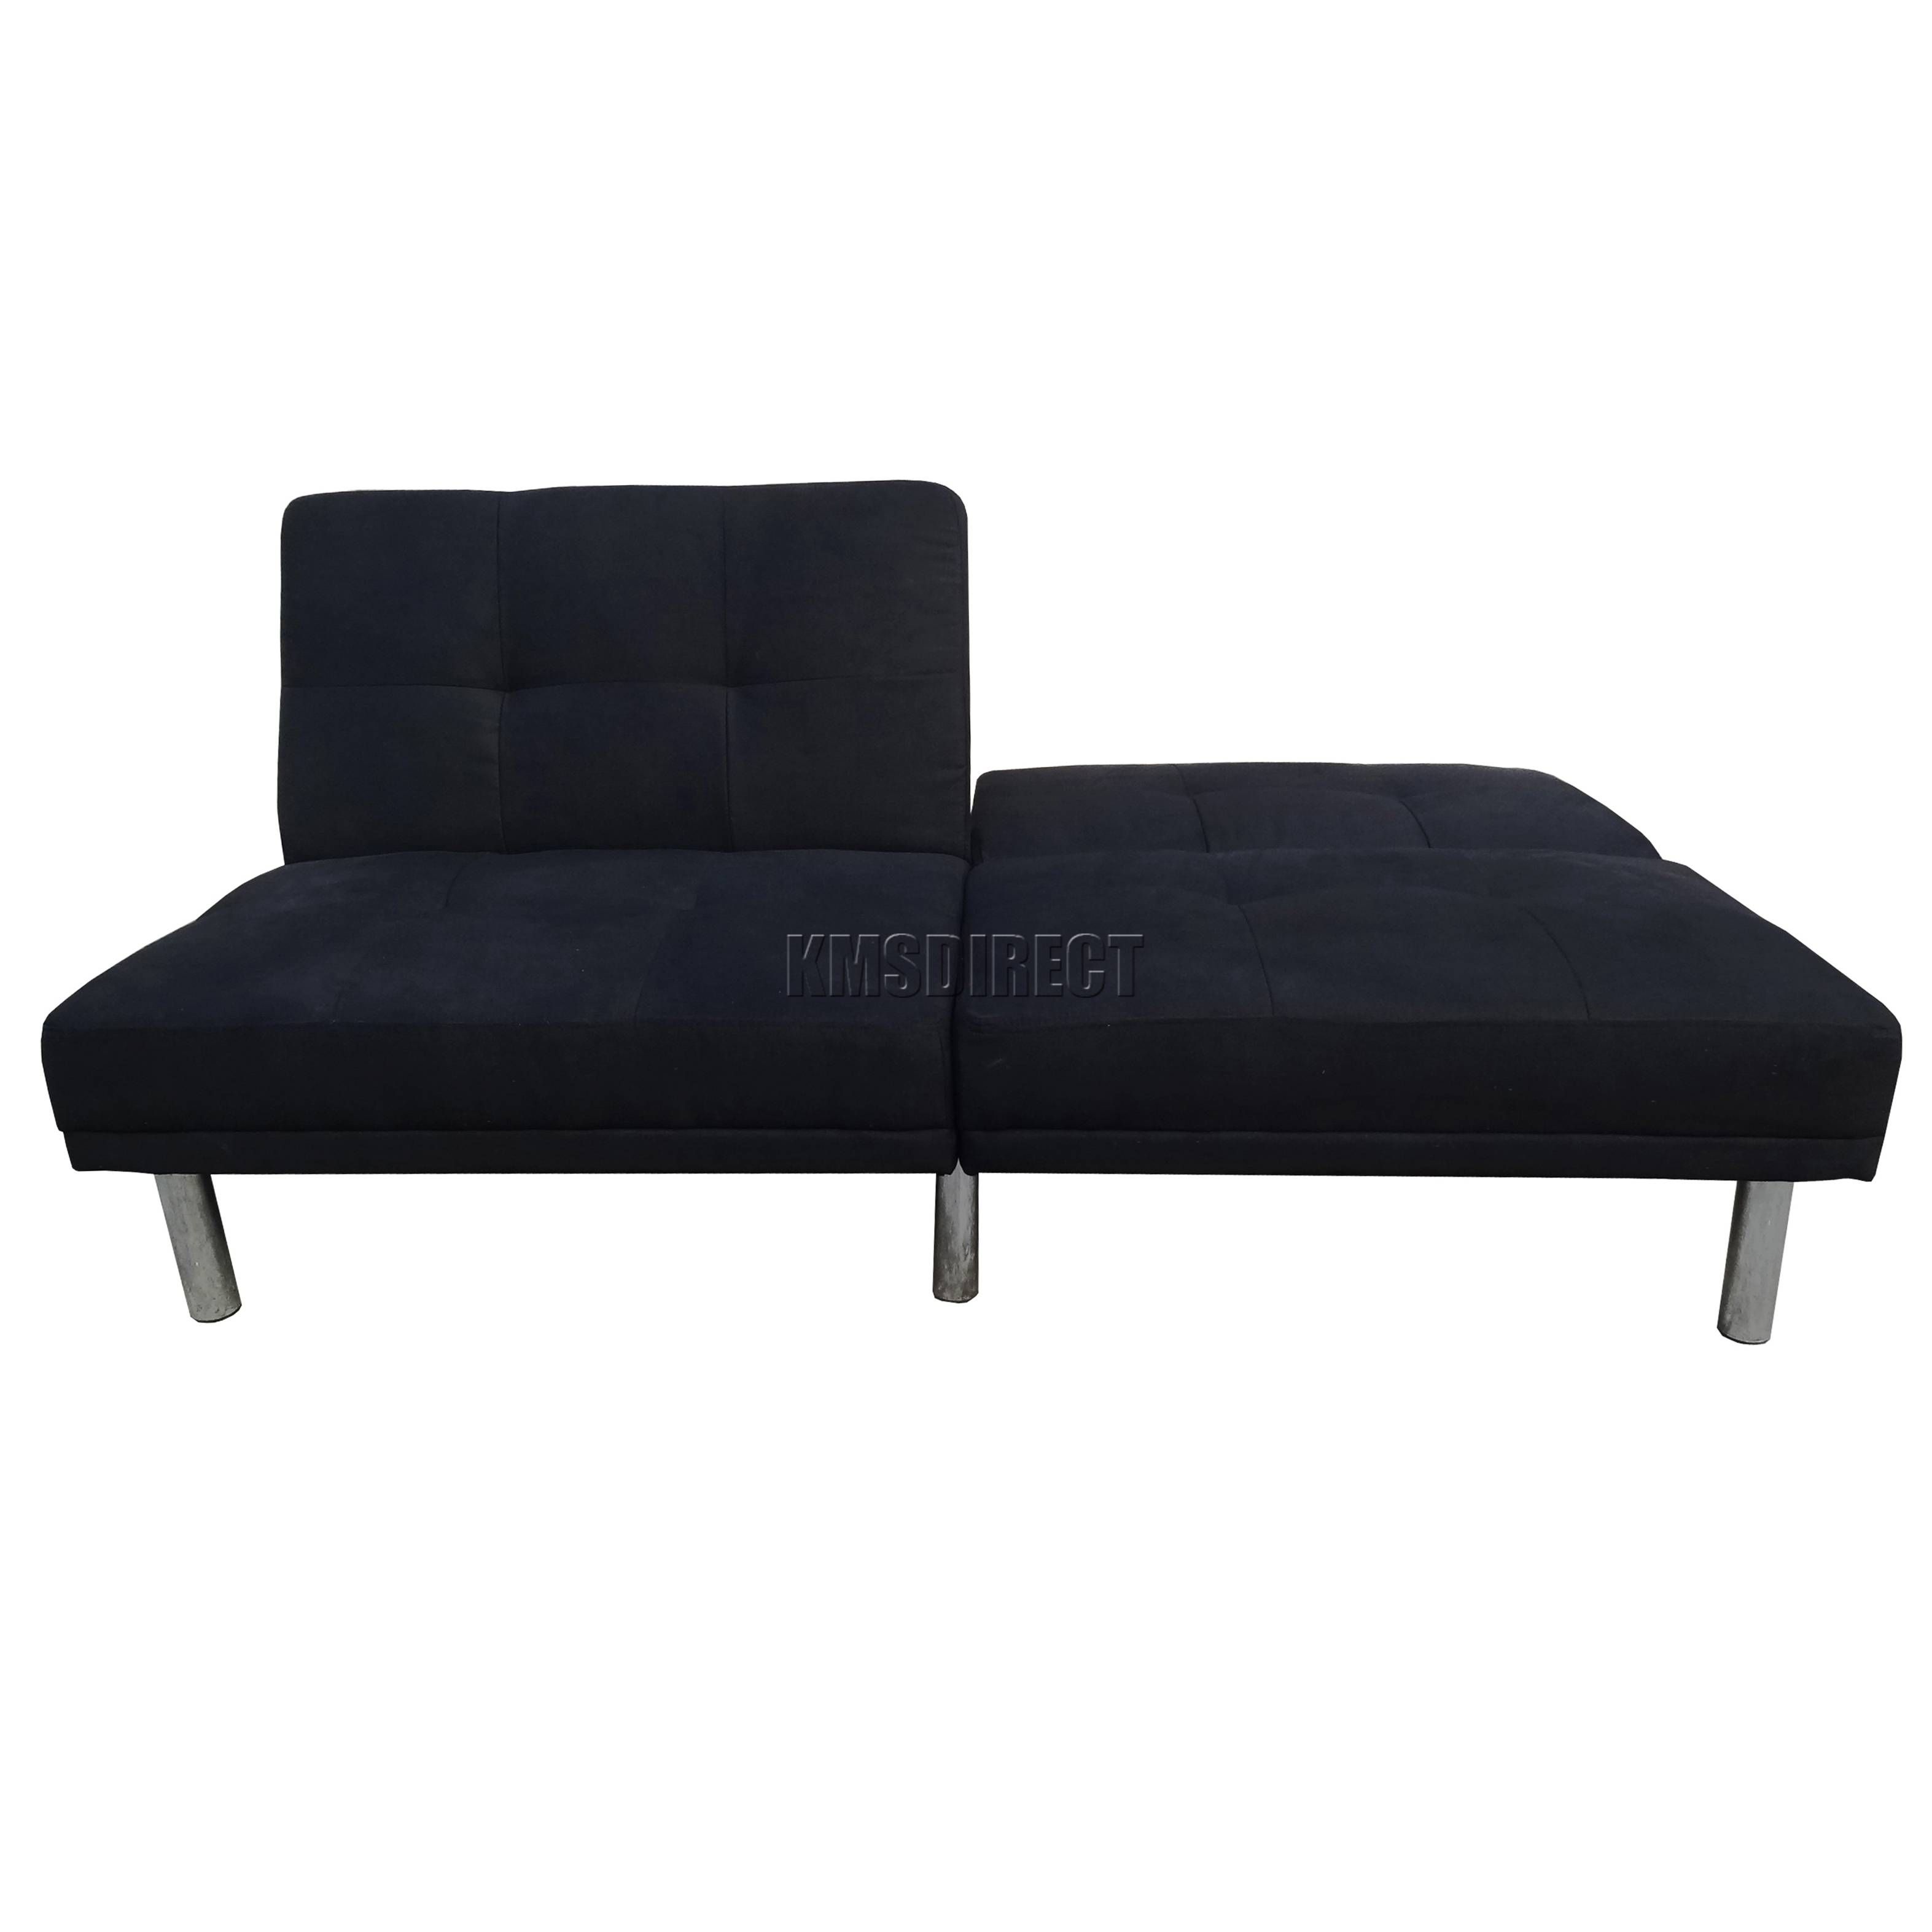 Foxhunter Fabric Faux Suede Sofa Bed Recliner 2 Seater Modern In Faux Suede Sofa Bed (View 22 of 25)